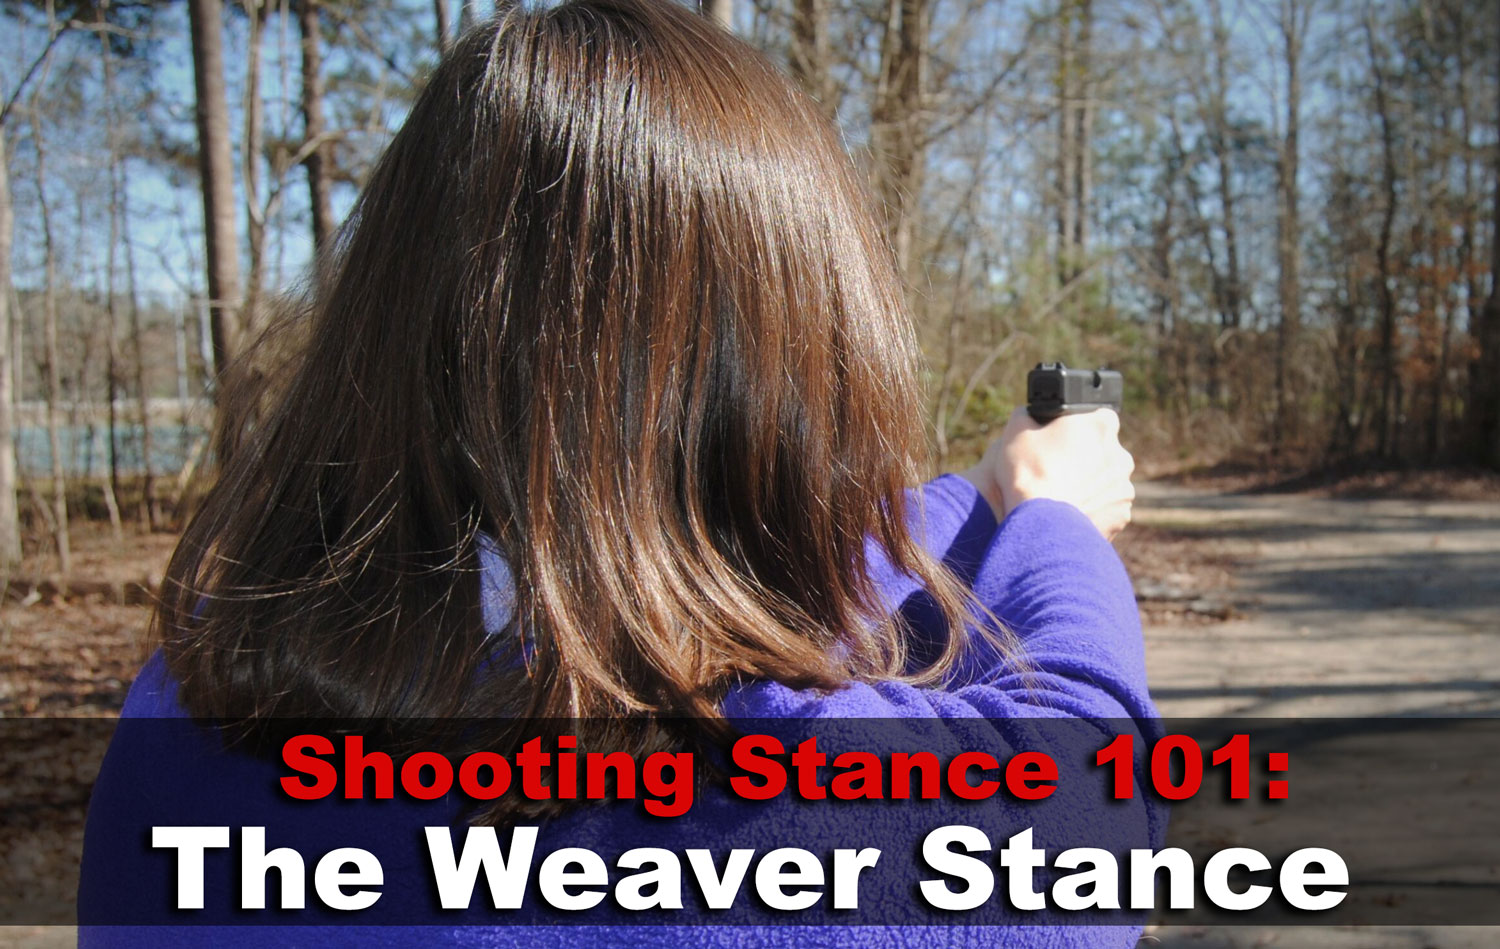 weaver stance demonstrated